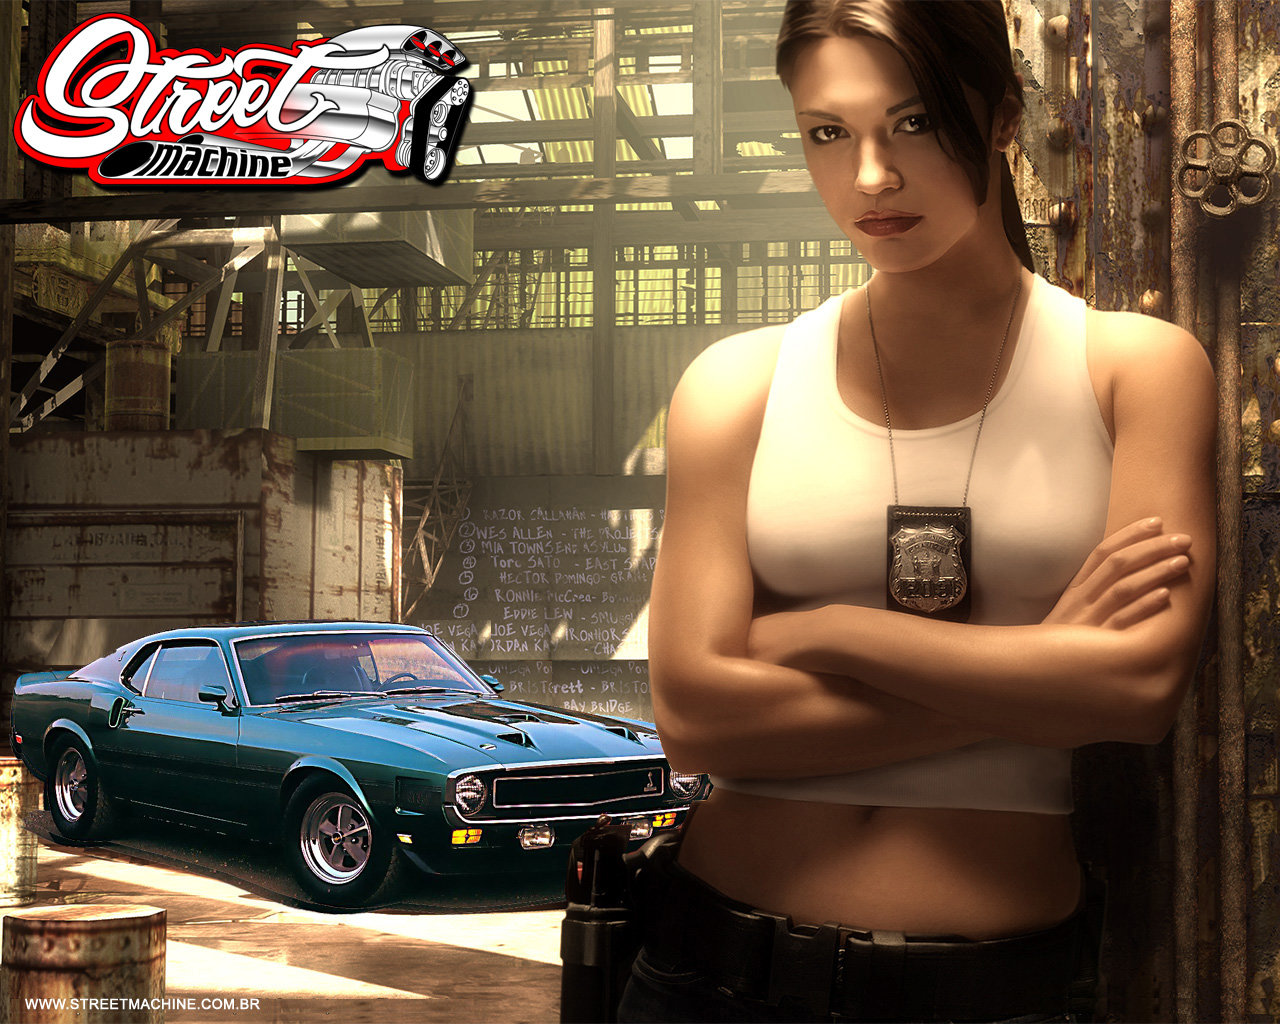 Best Need For Speed: Most Wanted wallpaper ID:137060 for High Resolution hd 1280x1024 PC